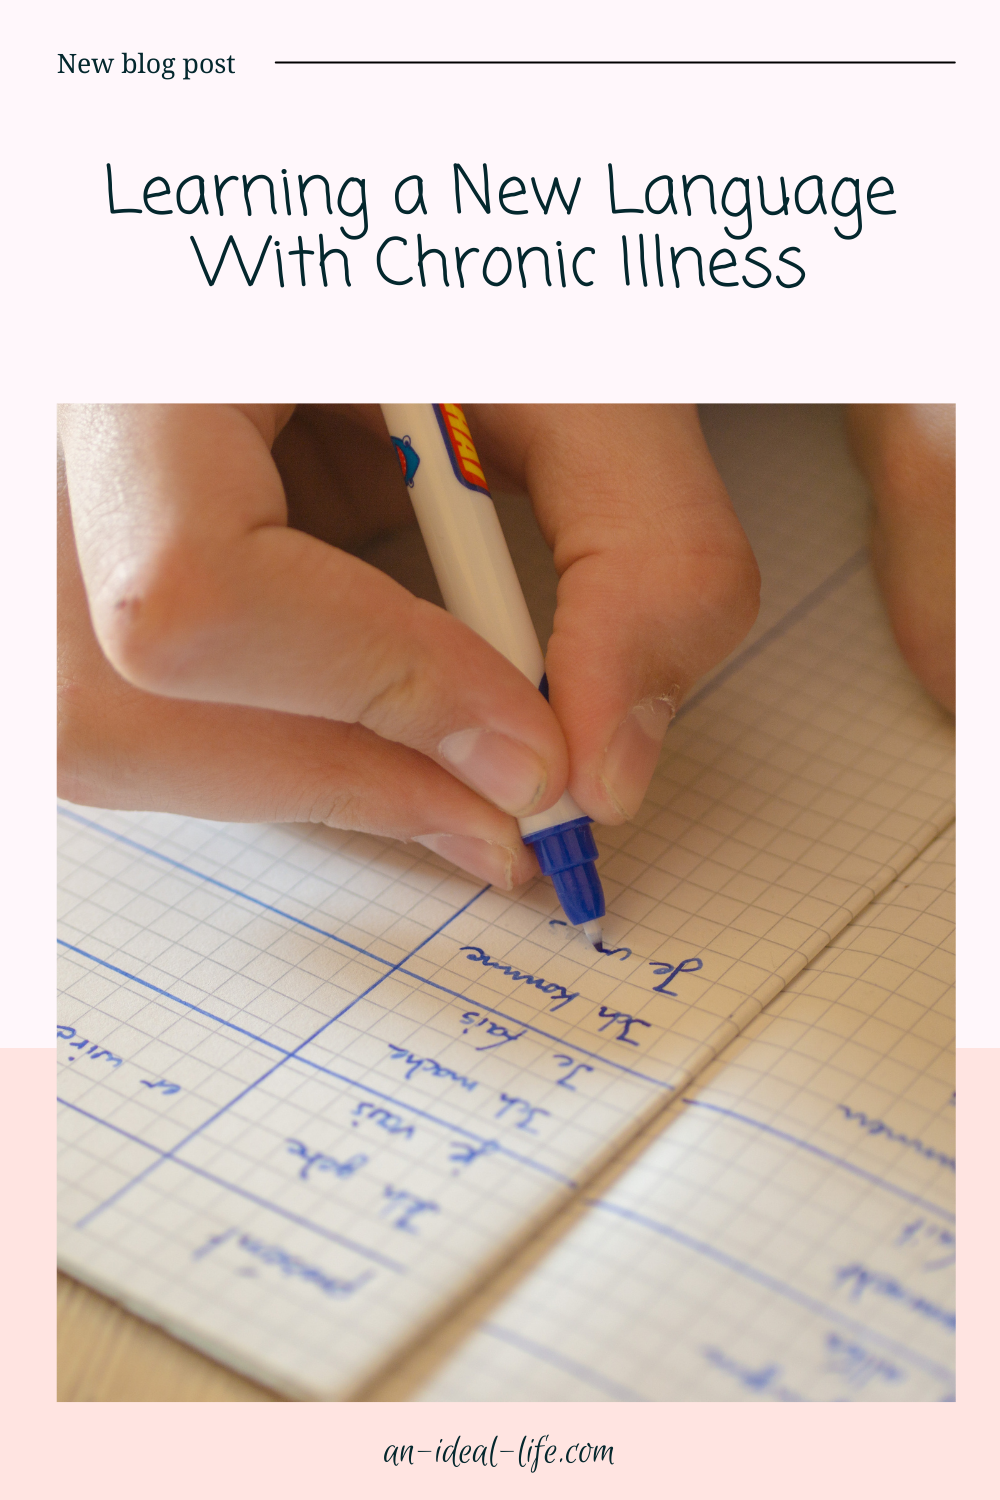 Learning a New Language With Chronic Illness